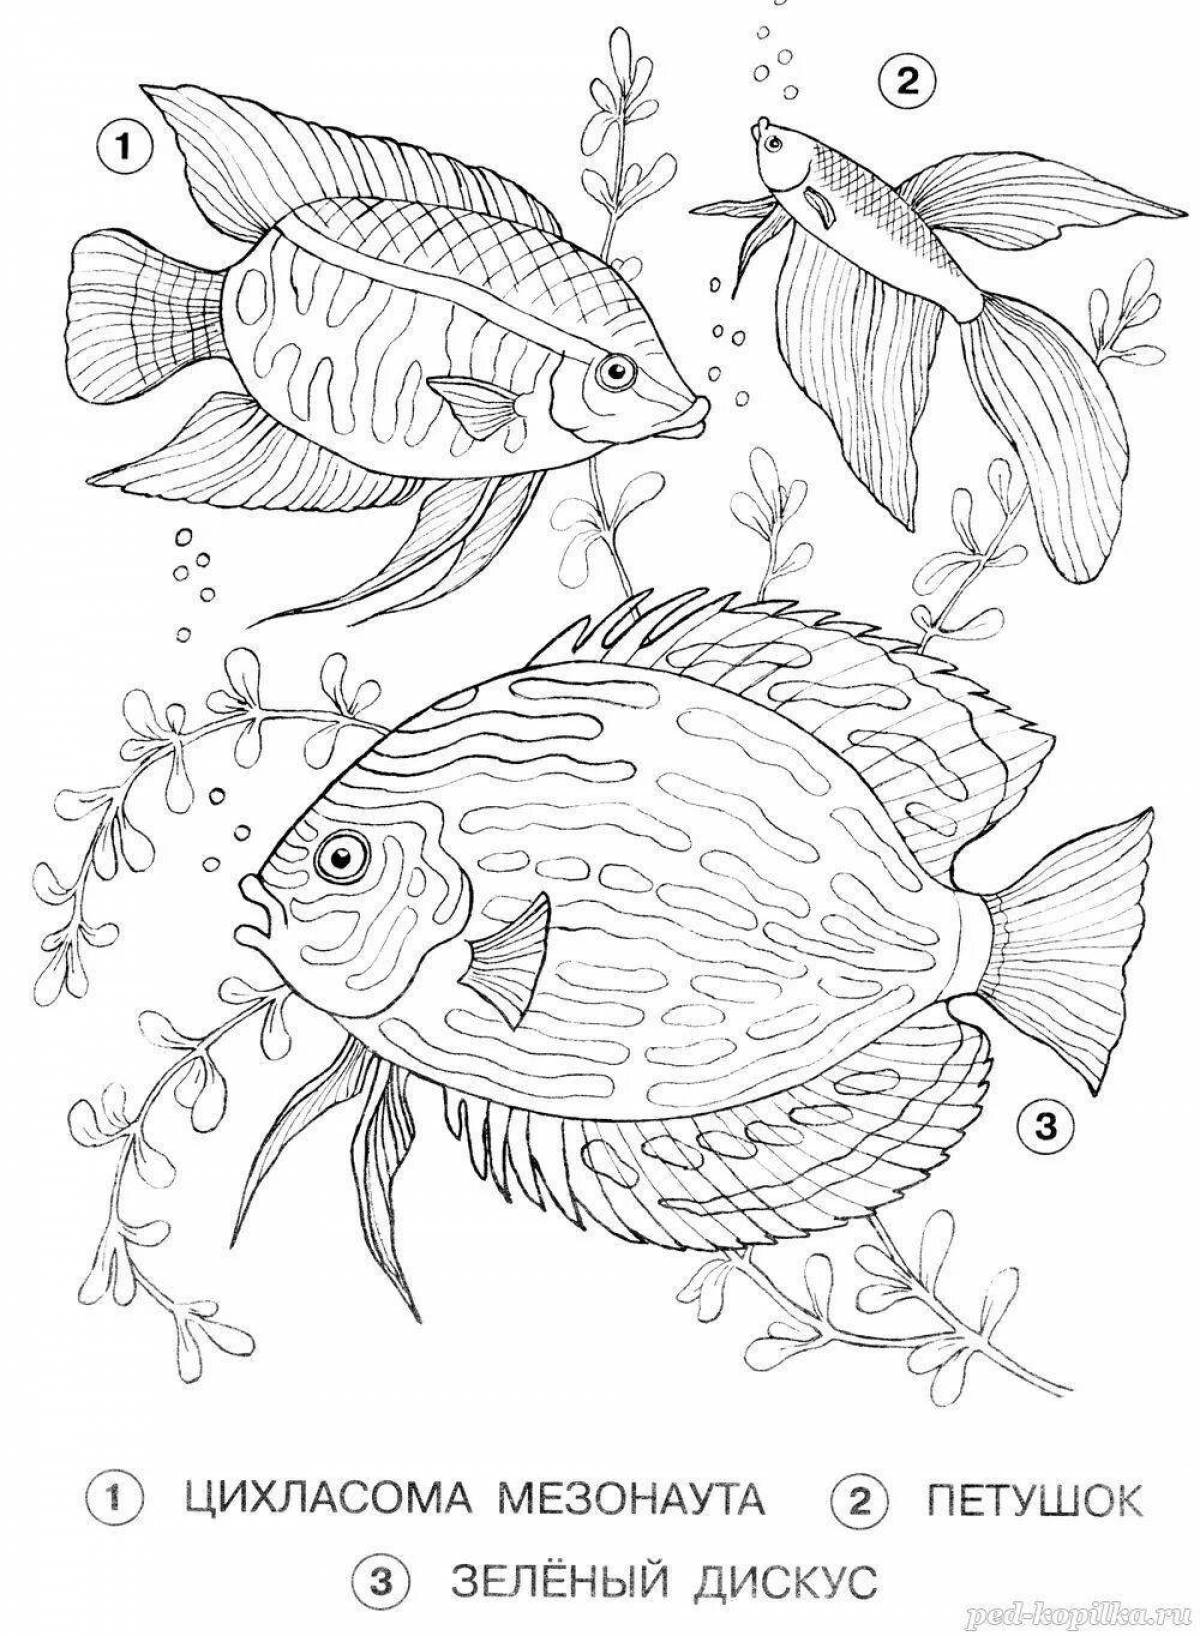 Fun aquarium fish coloring pages with names for kids